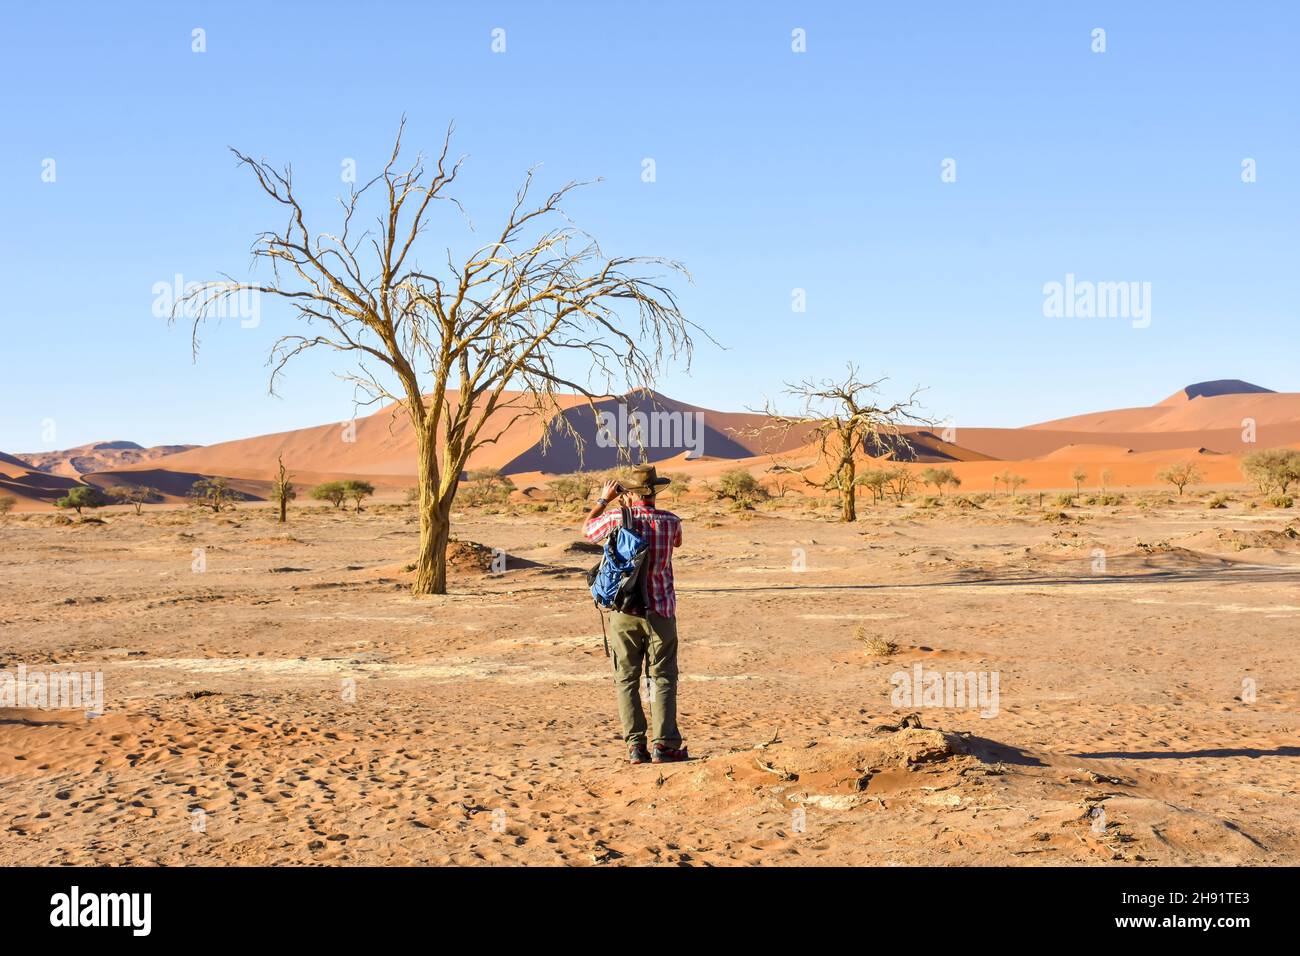 Male tourist taking photos near the famous sand dunes in the Namib-Naukluft park area in Namibia Southern Africa Stock Photo